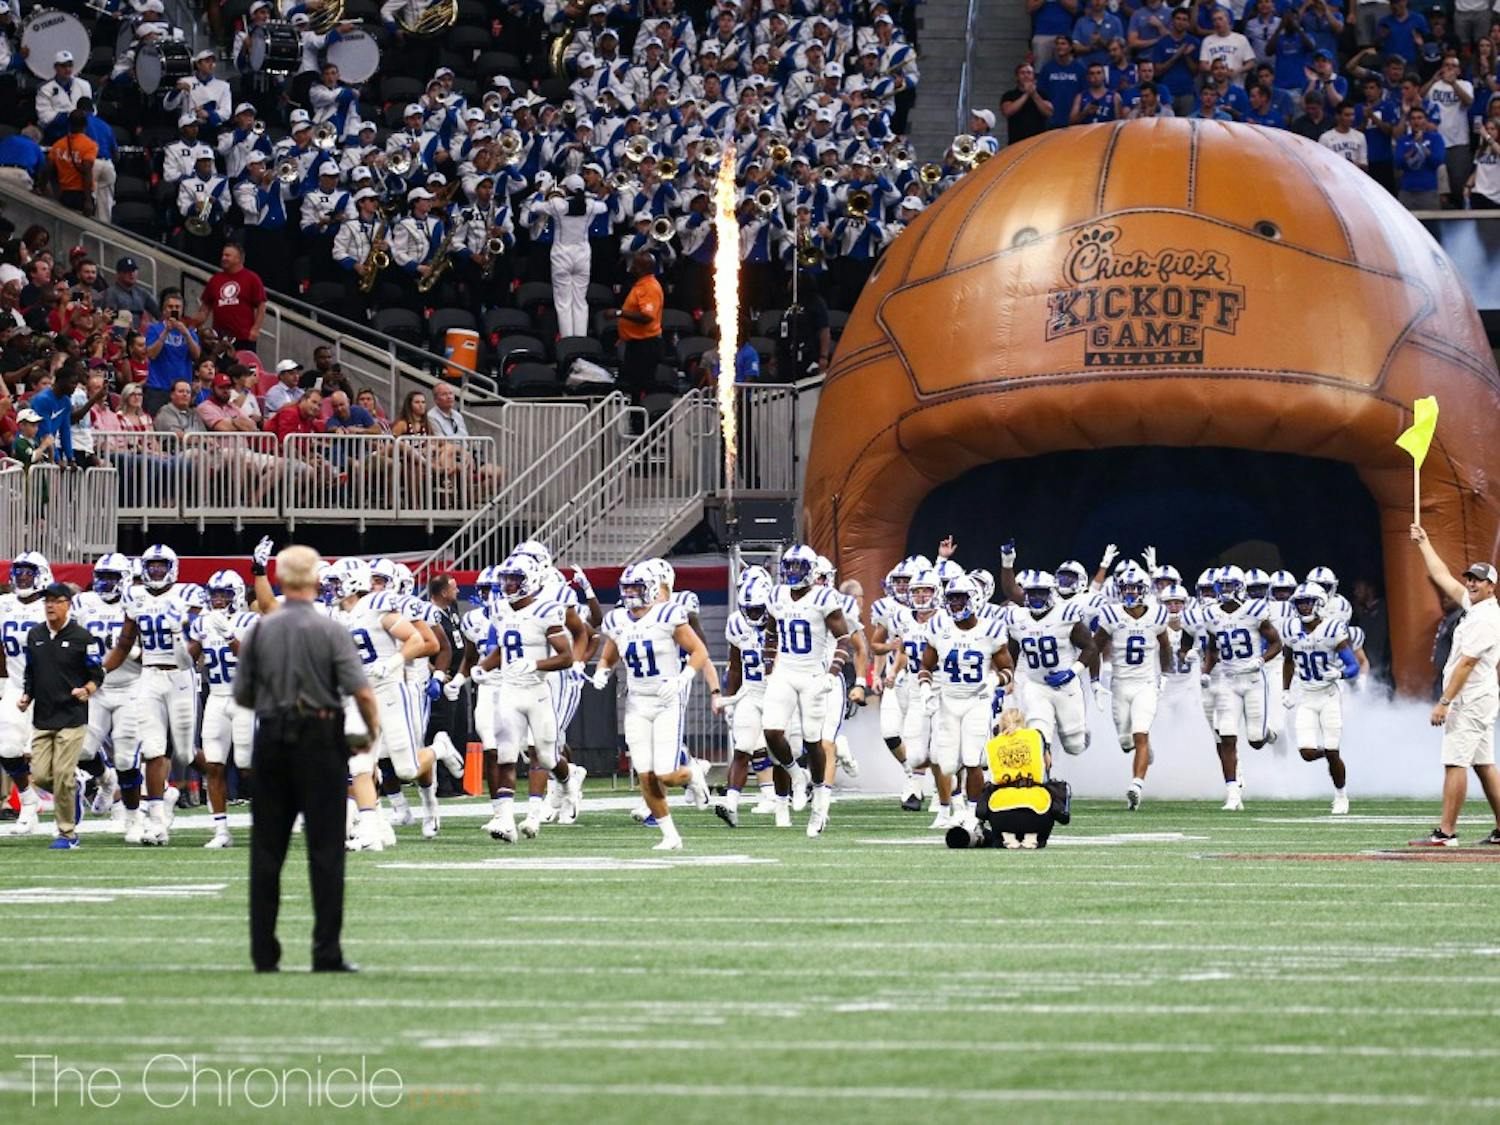 Duke Football played Alabama at the 2019 Chick-fil-A Kickoff Game at the Mercedes-Benz Stadium in Atlanta, Georgia. Final score was 3-42, with Alabama winning the Old Leather Helmet.&nbsp;